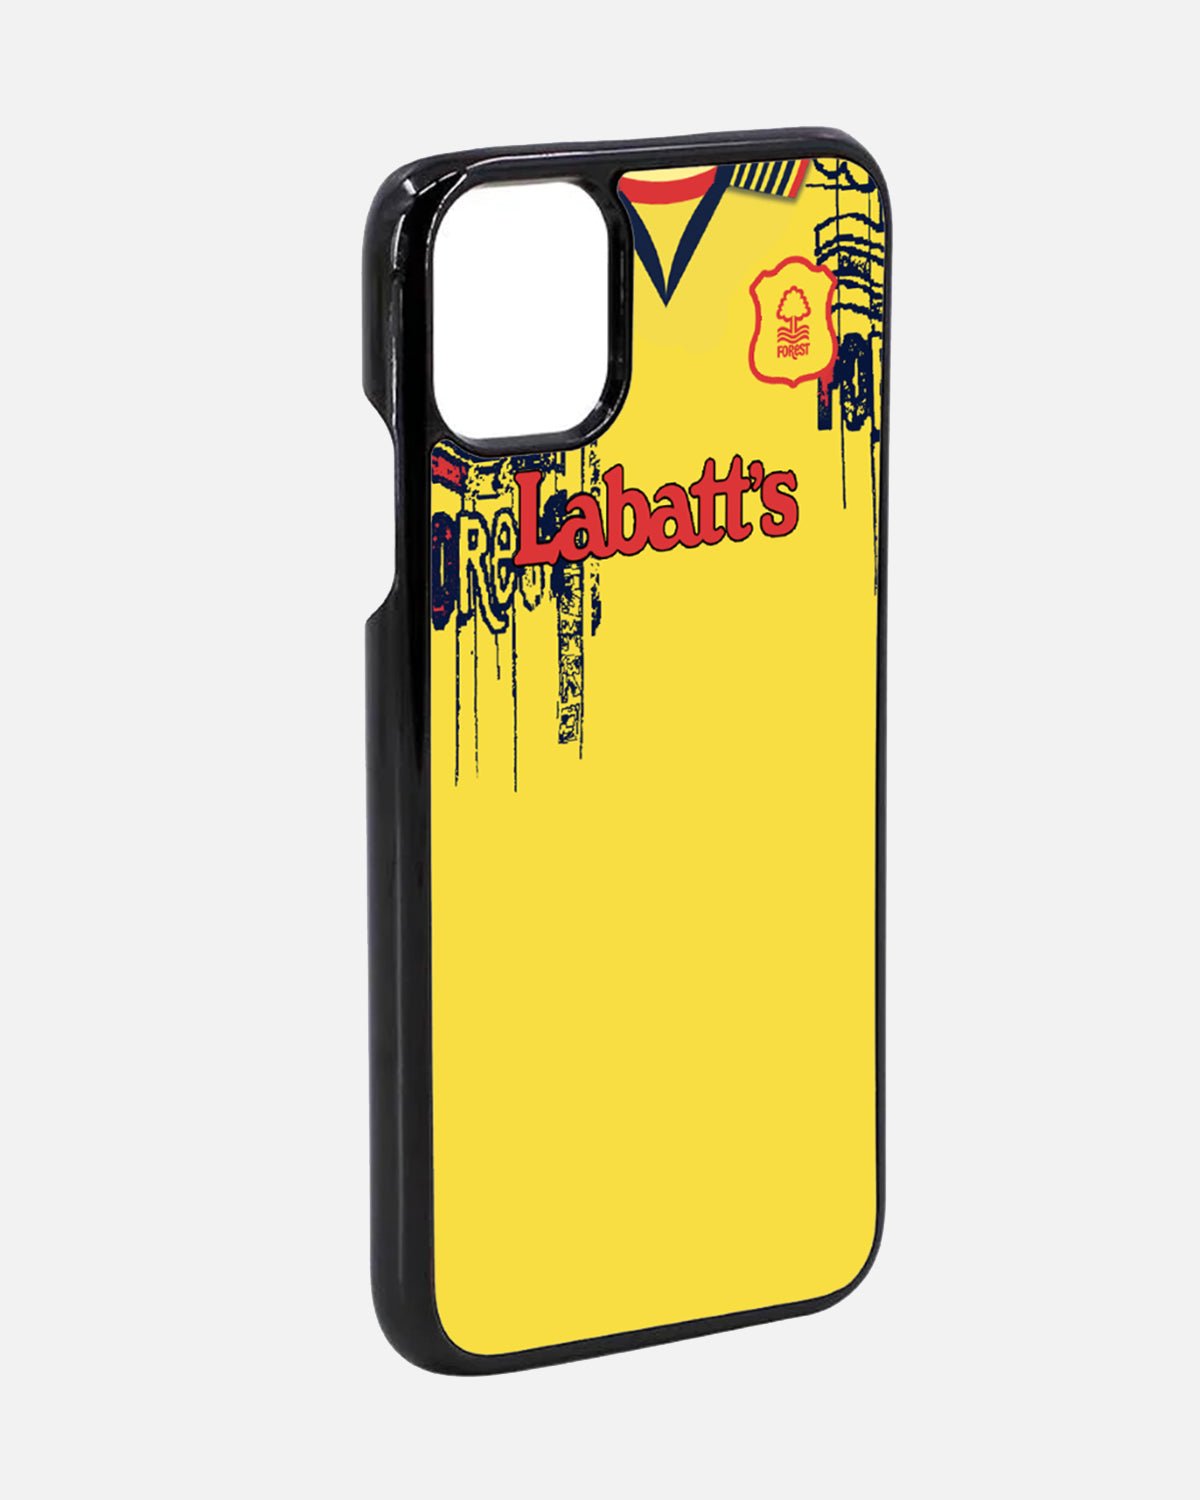 NFFC 1997 Away Kit Phone Cover - Nottingham Forest FC